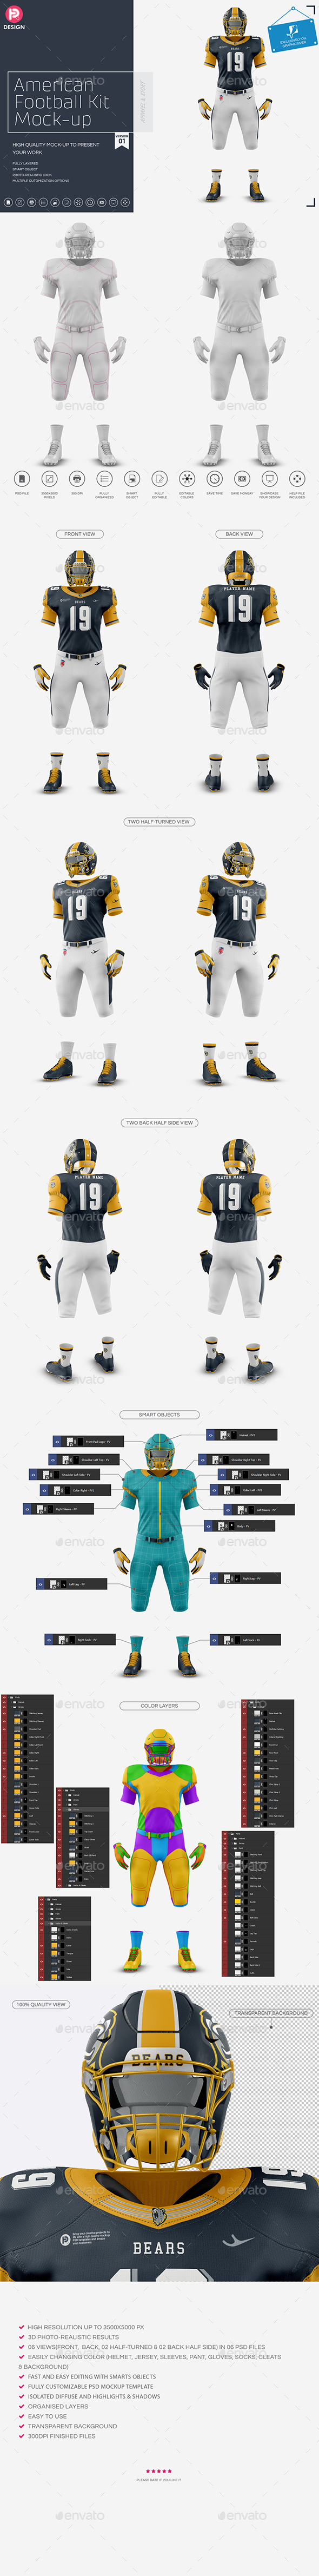 Download American Football Kit Mockup V1 By Trdesignme Graphicriver